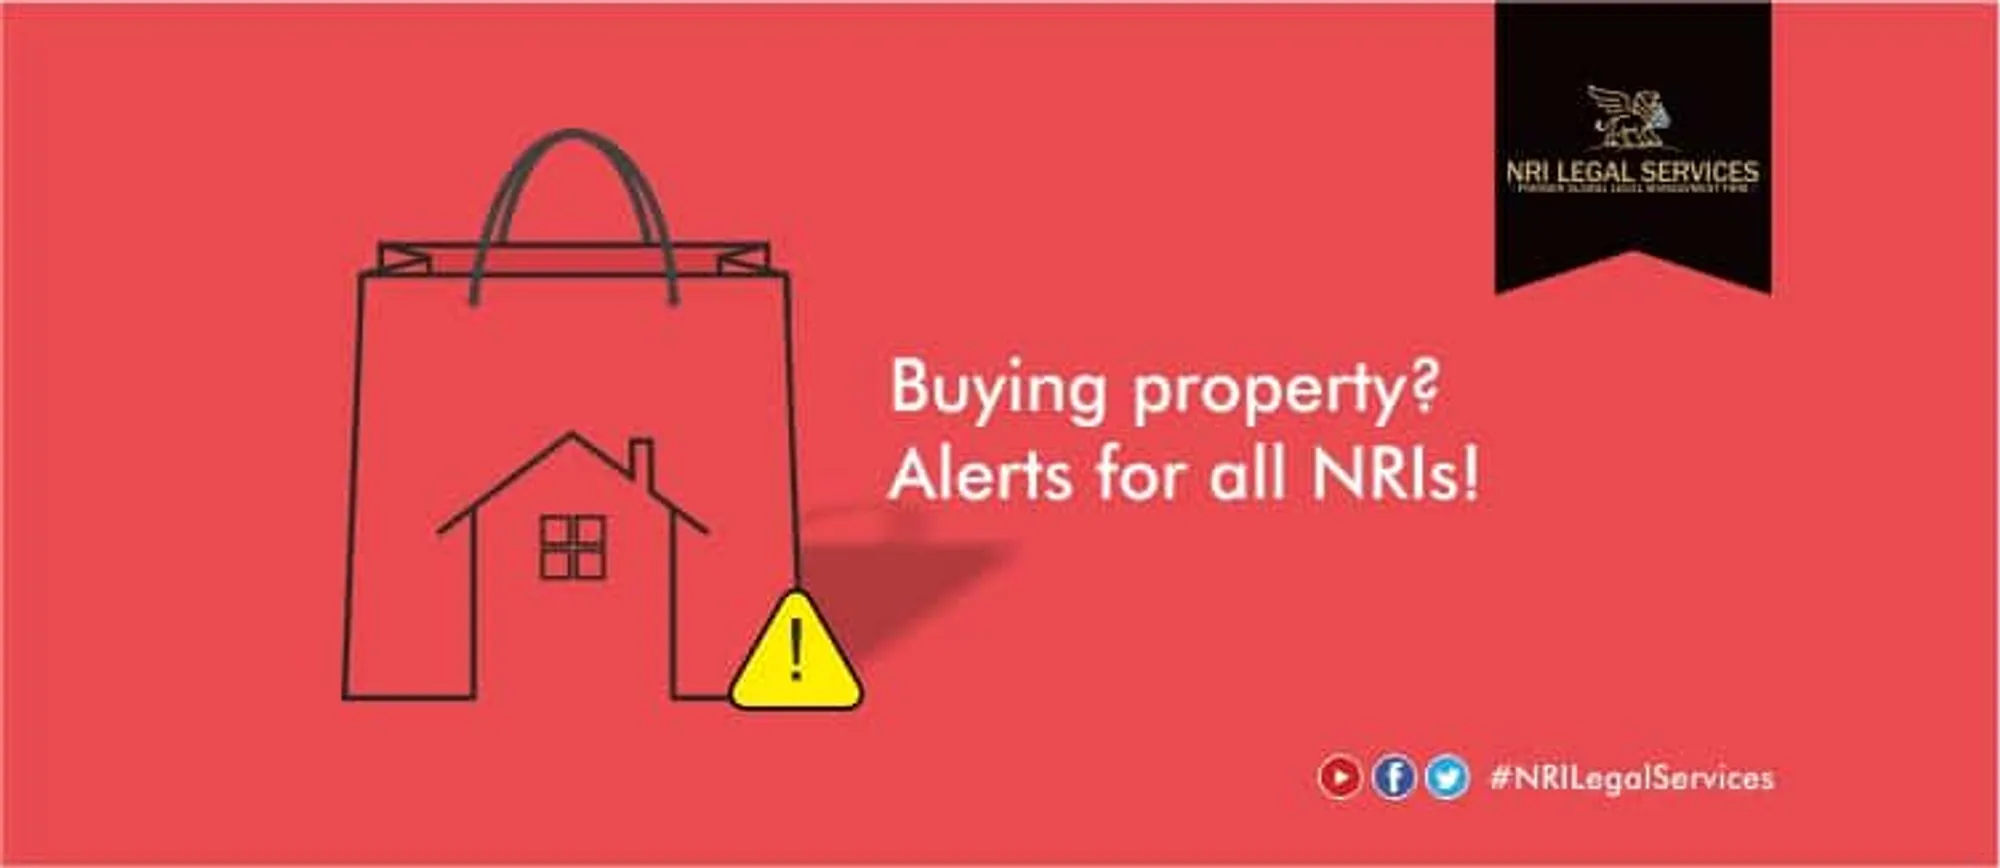 NRIs Alert! Buying property in India? The guidelines